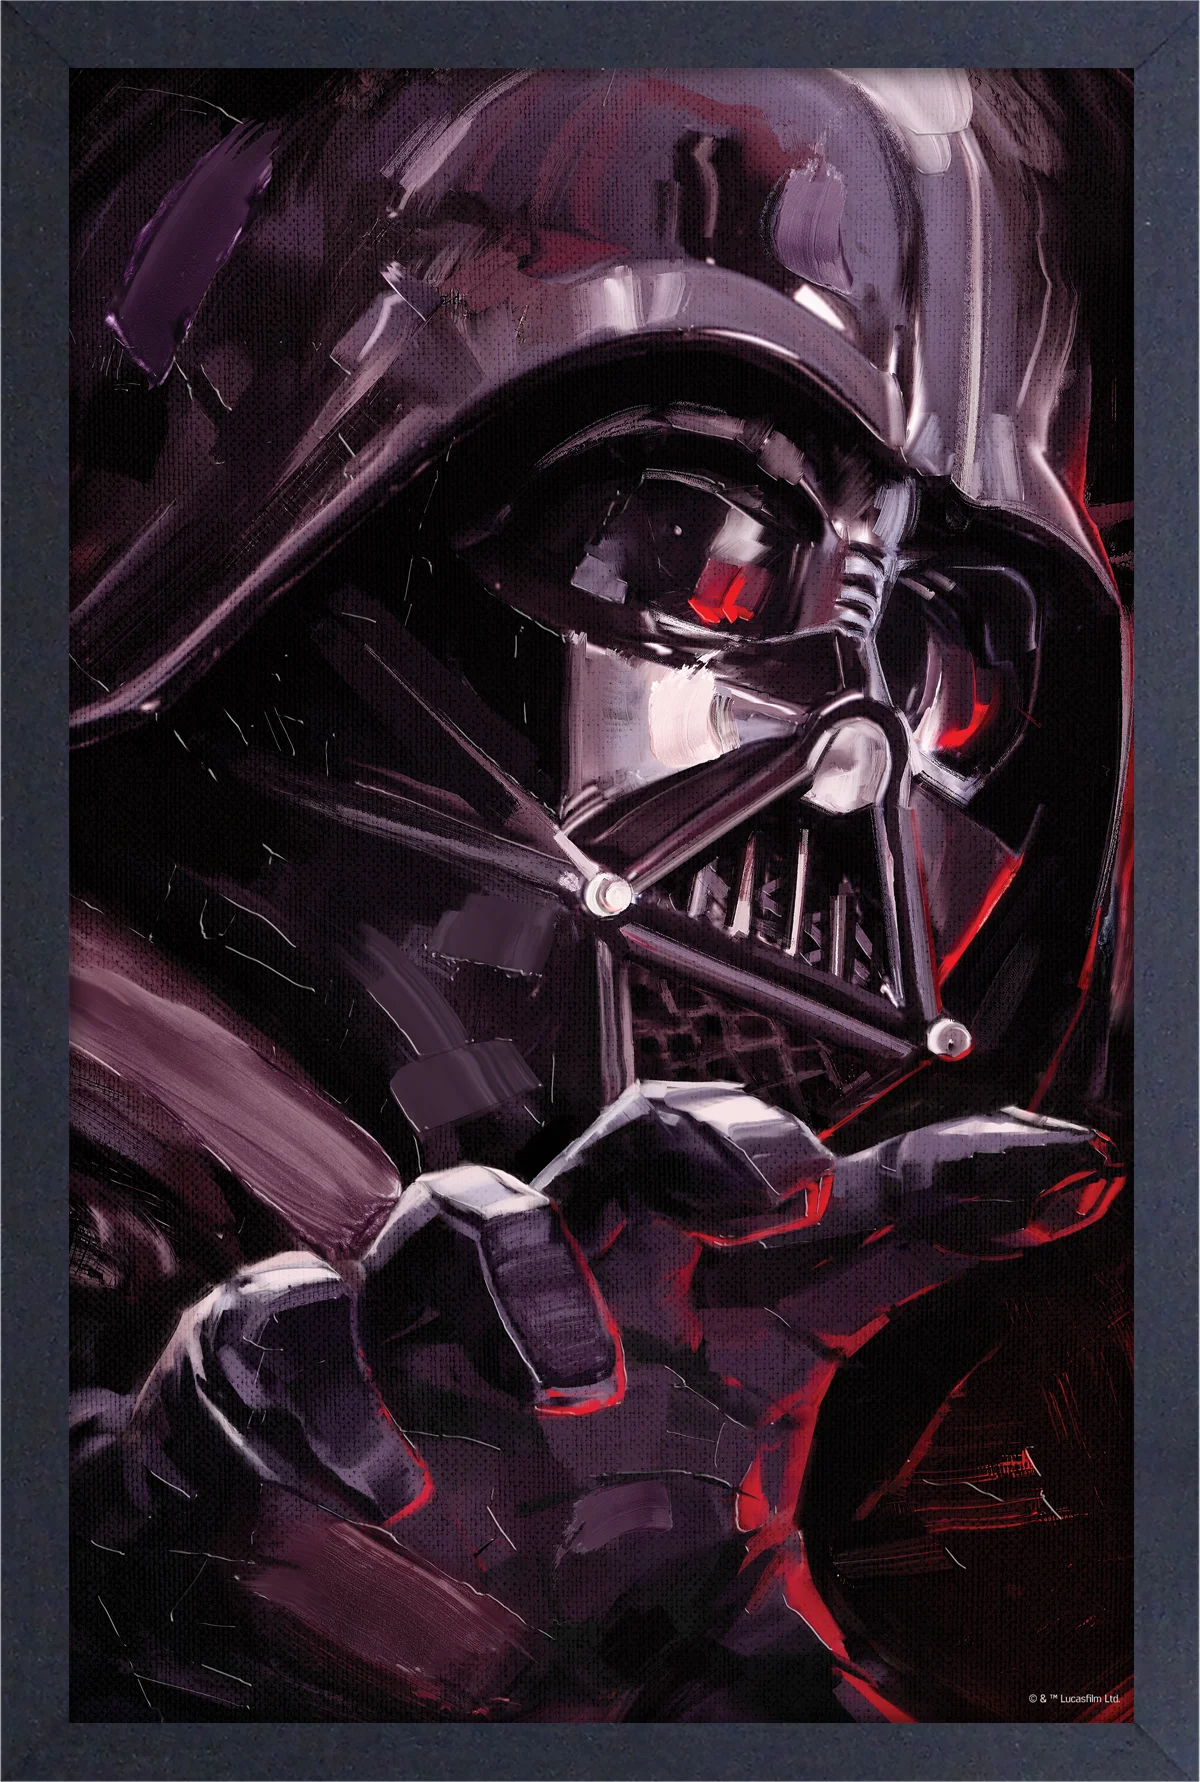 Star Wars - Darth Vader (Brushed) (11"x17" Gel-Coat) (Order in multiples of 6, mix and match styles)